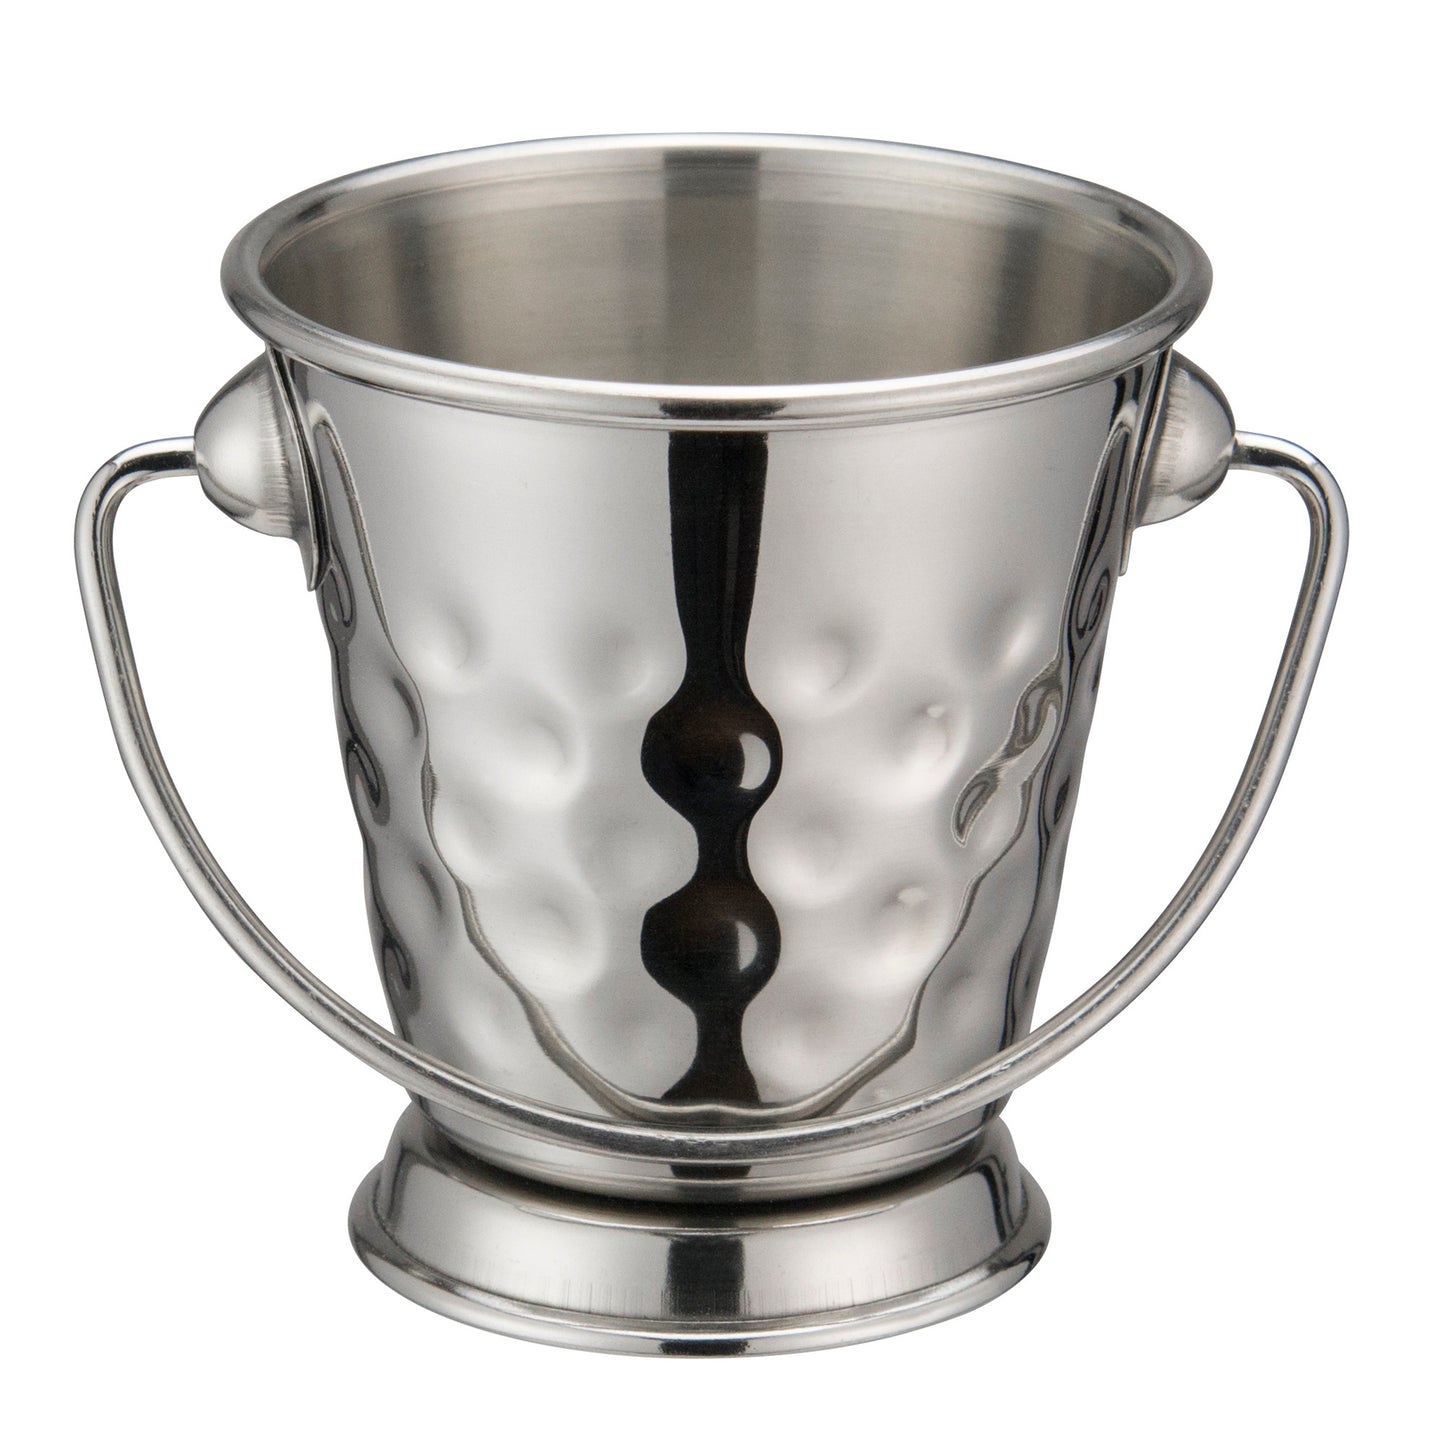 DDSA-101S - Stainless Steel Mini Pail - Hammered, 3"